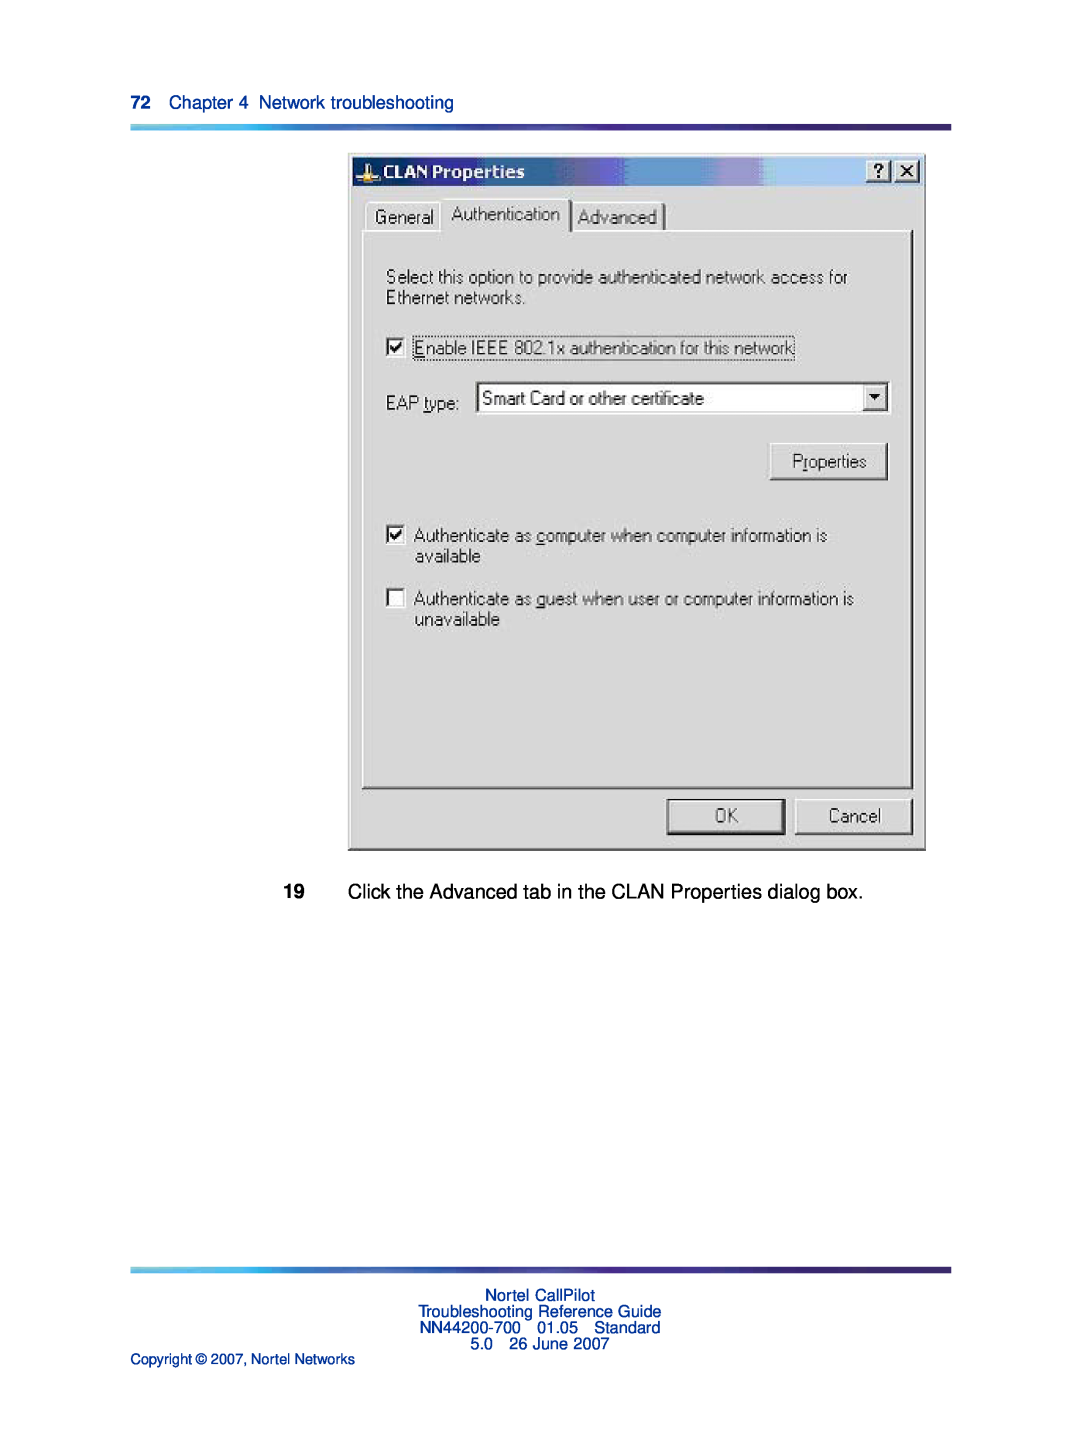 Nortel Networks NN44200-700 manual Click the Advanced tab in the CLAN Properties dialog box, Network troubleshooting 